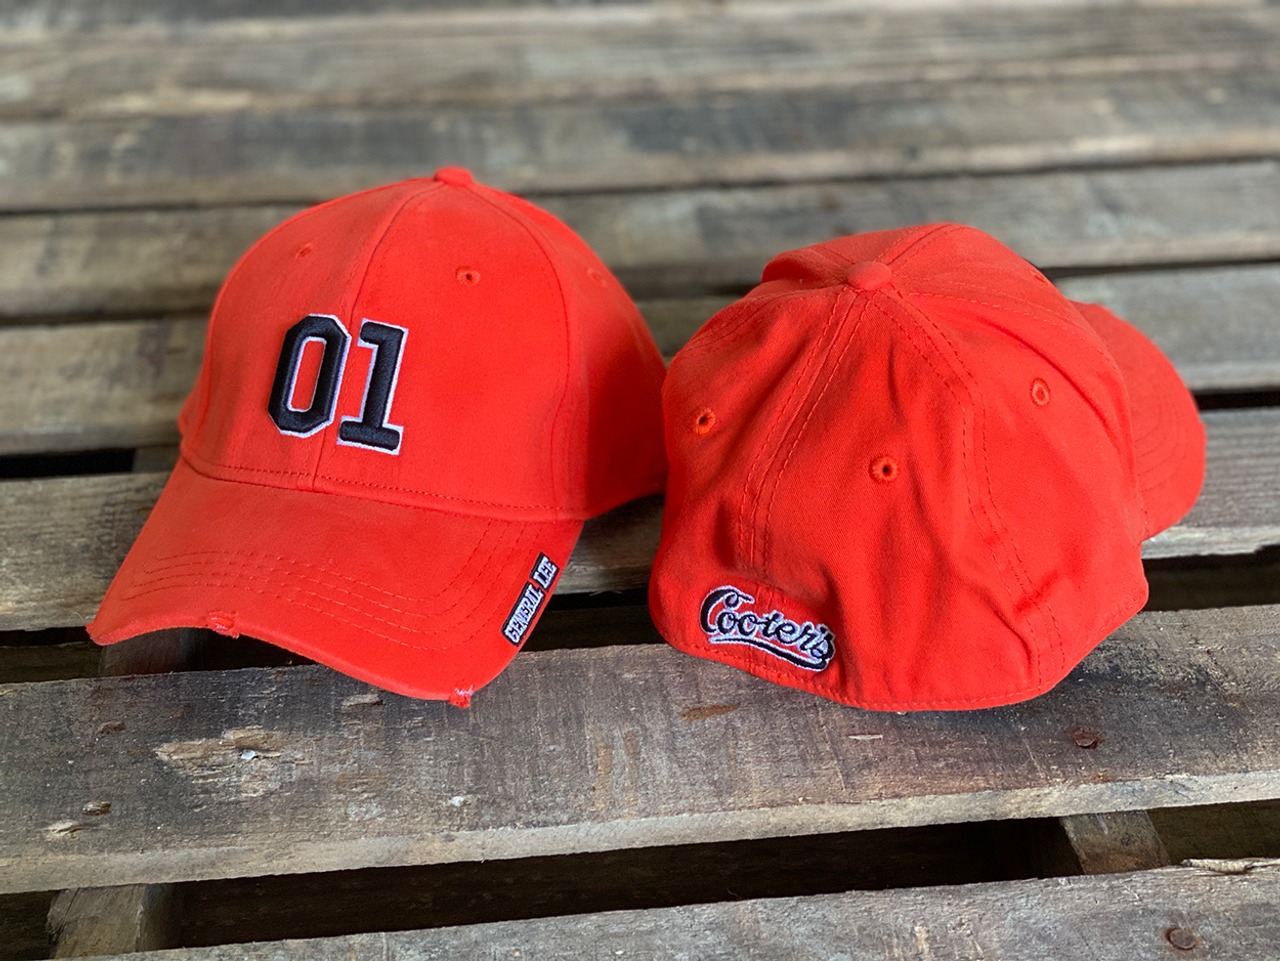 Cooter's Orange 01 Fitted Hat